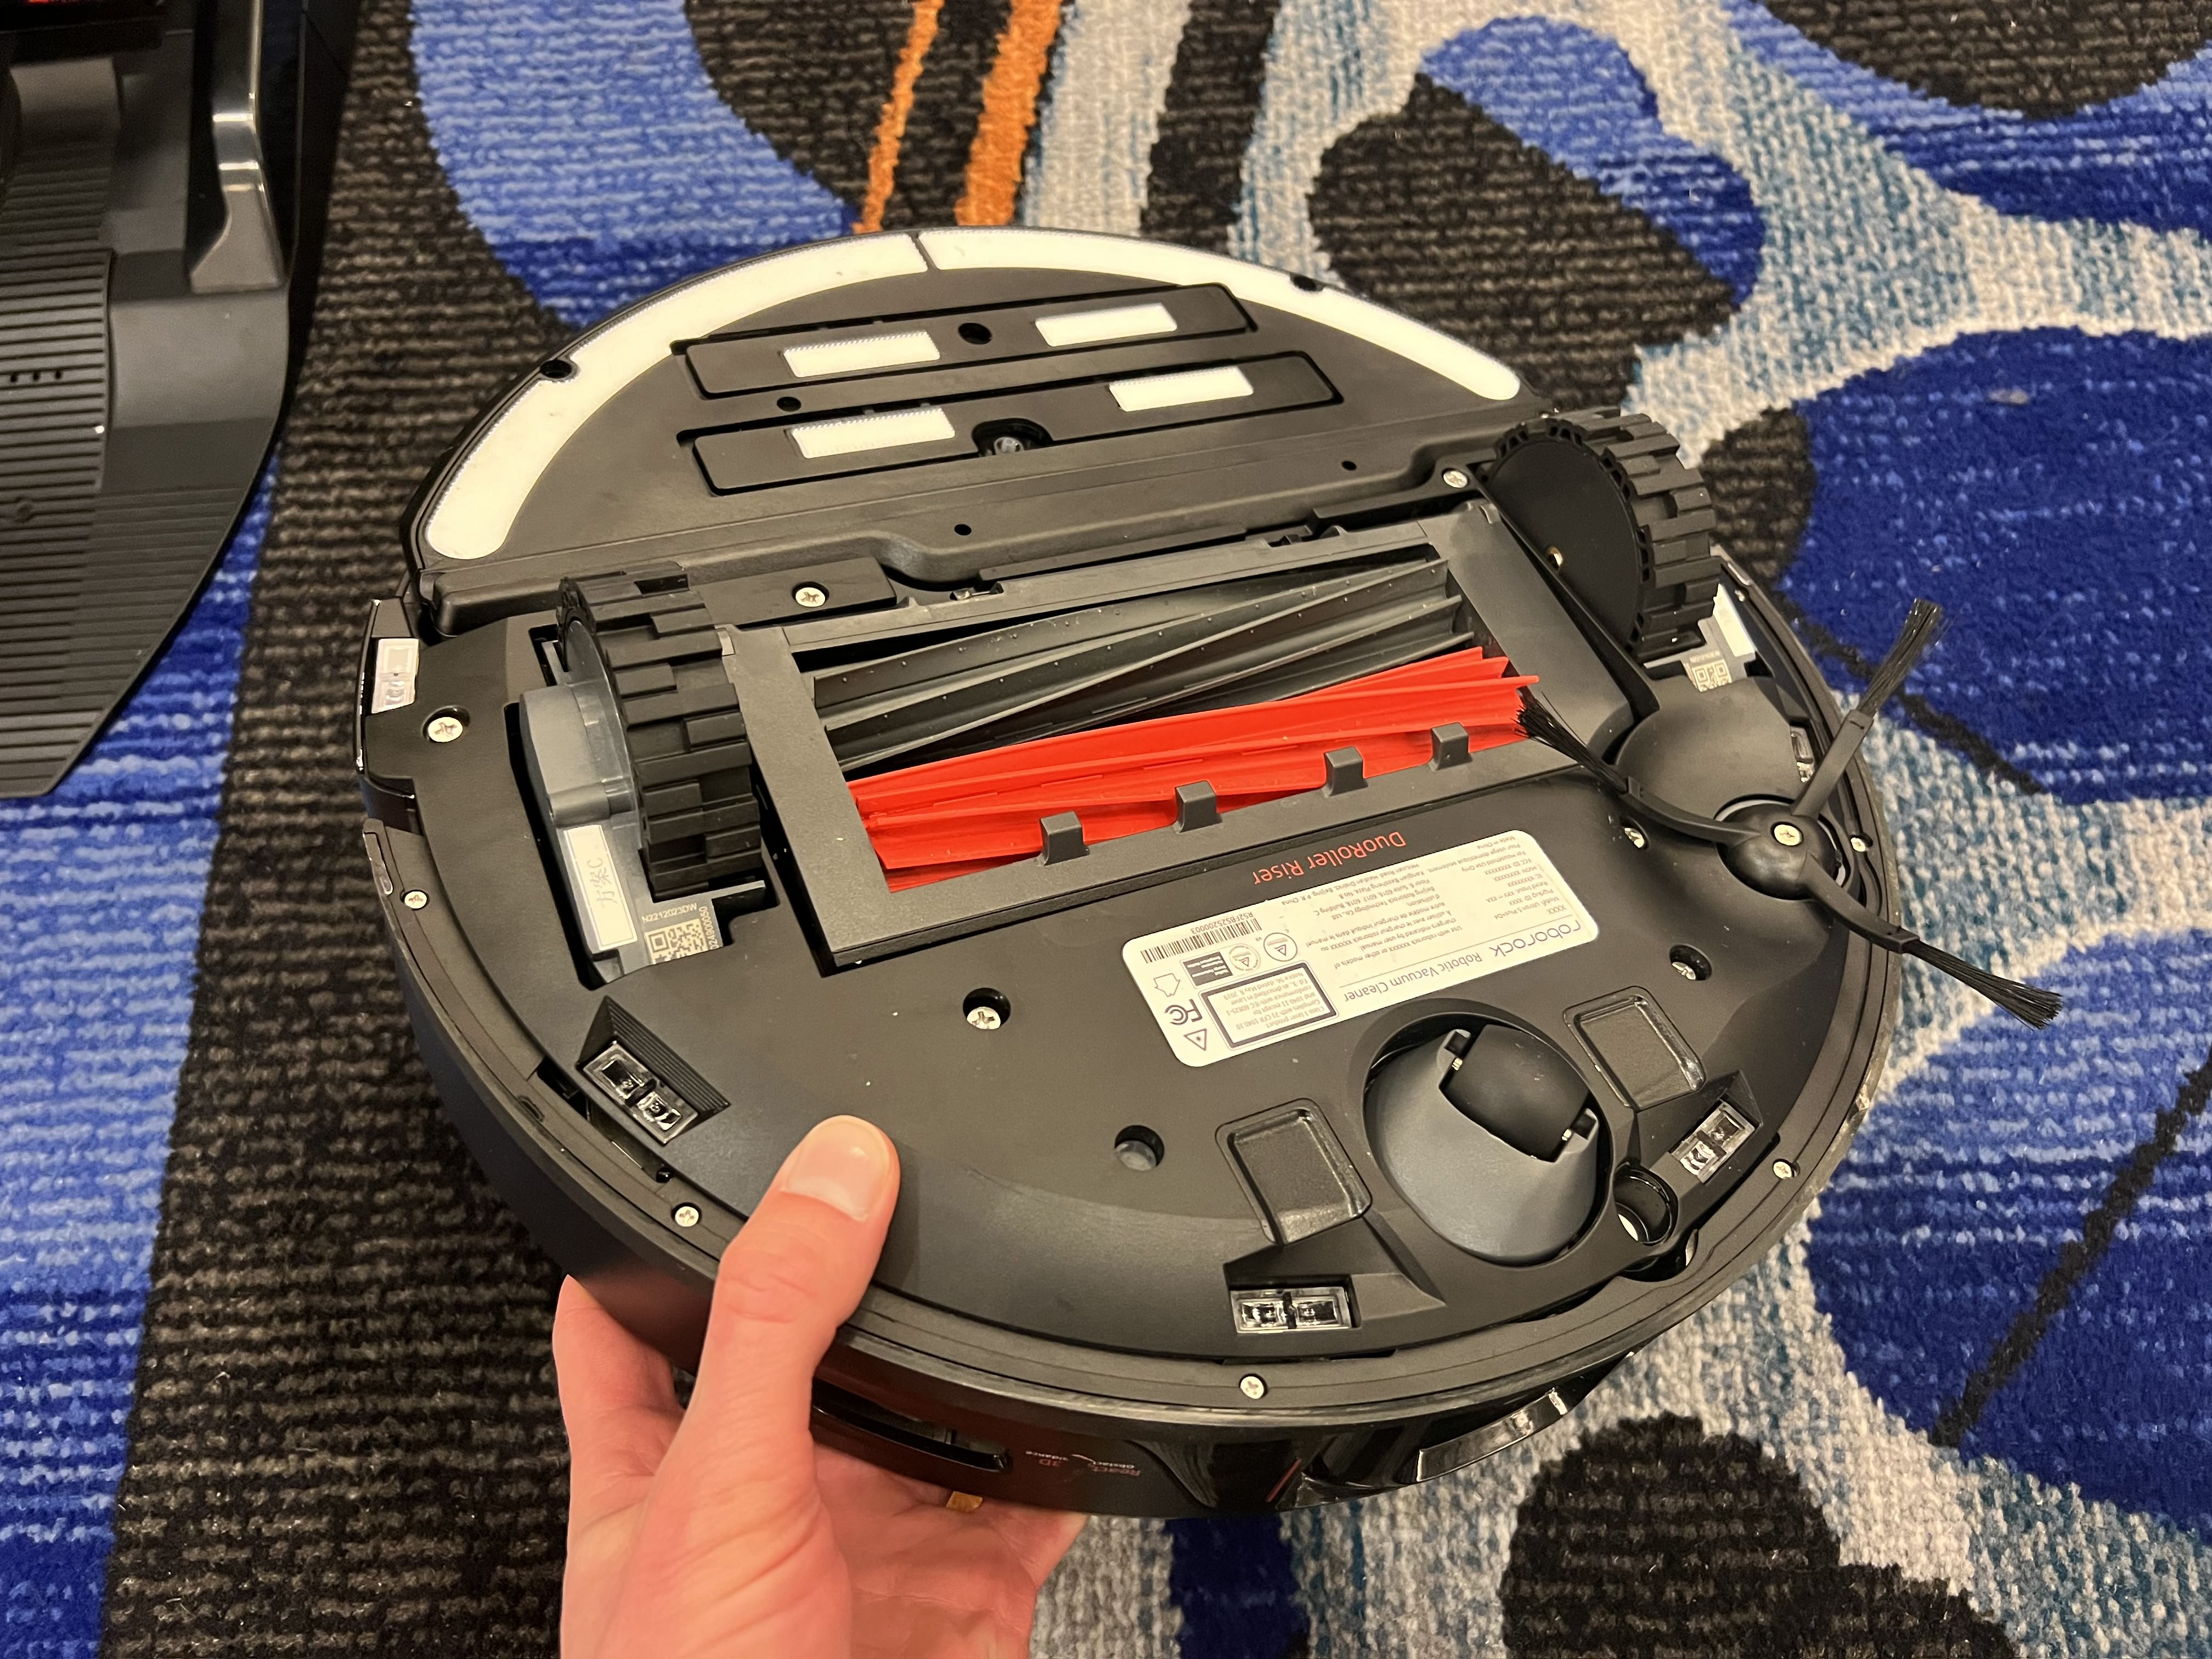 Roborock S8 Pro Ultra may be the Mercedes Benz of robot vacuums